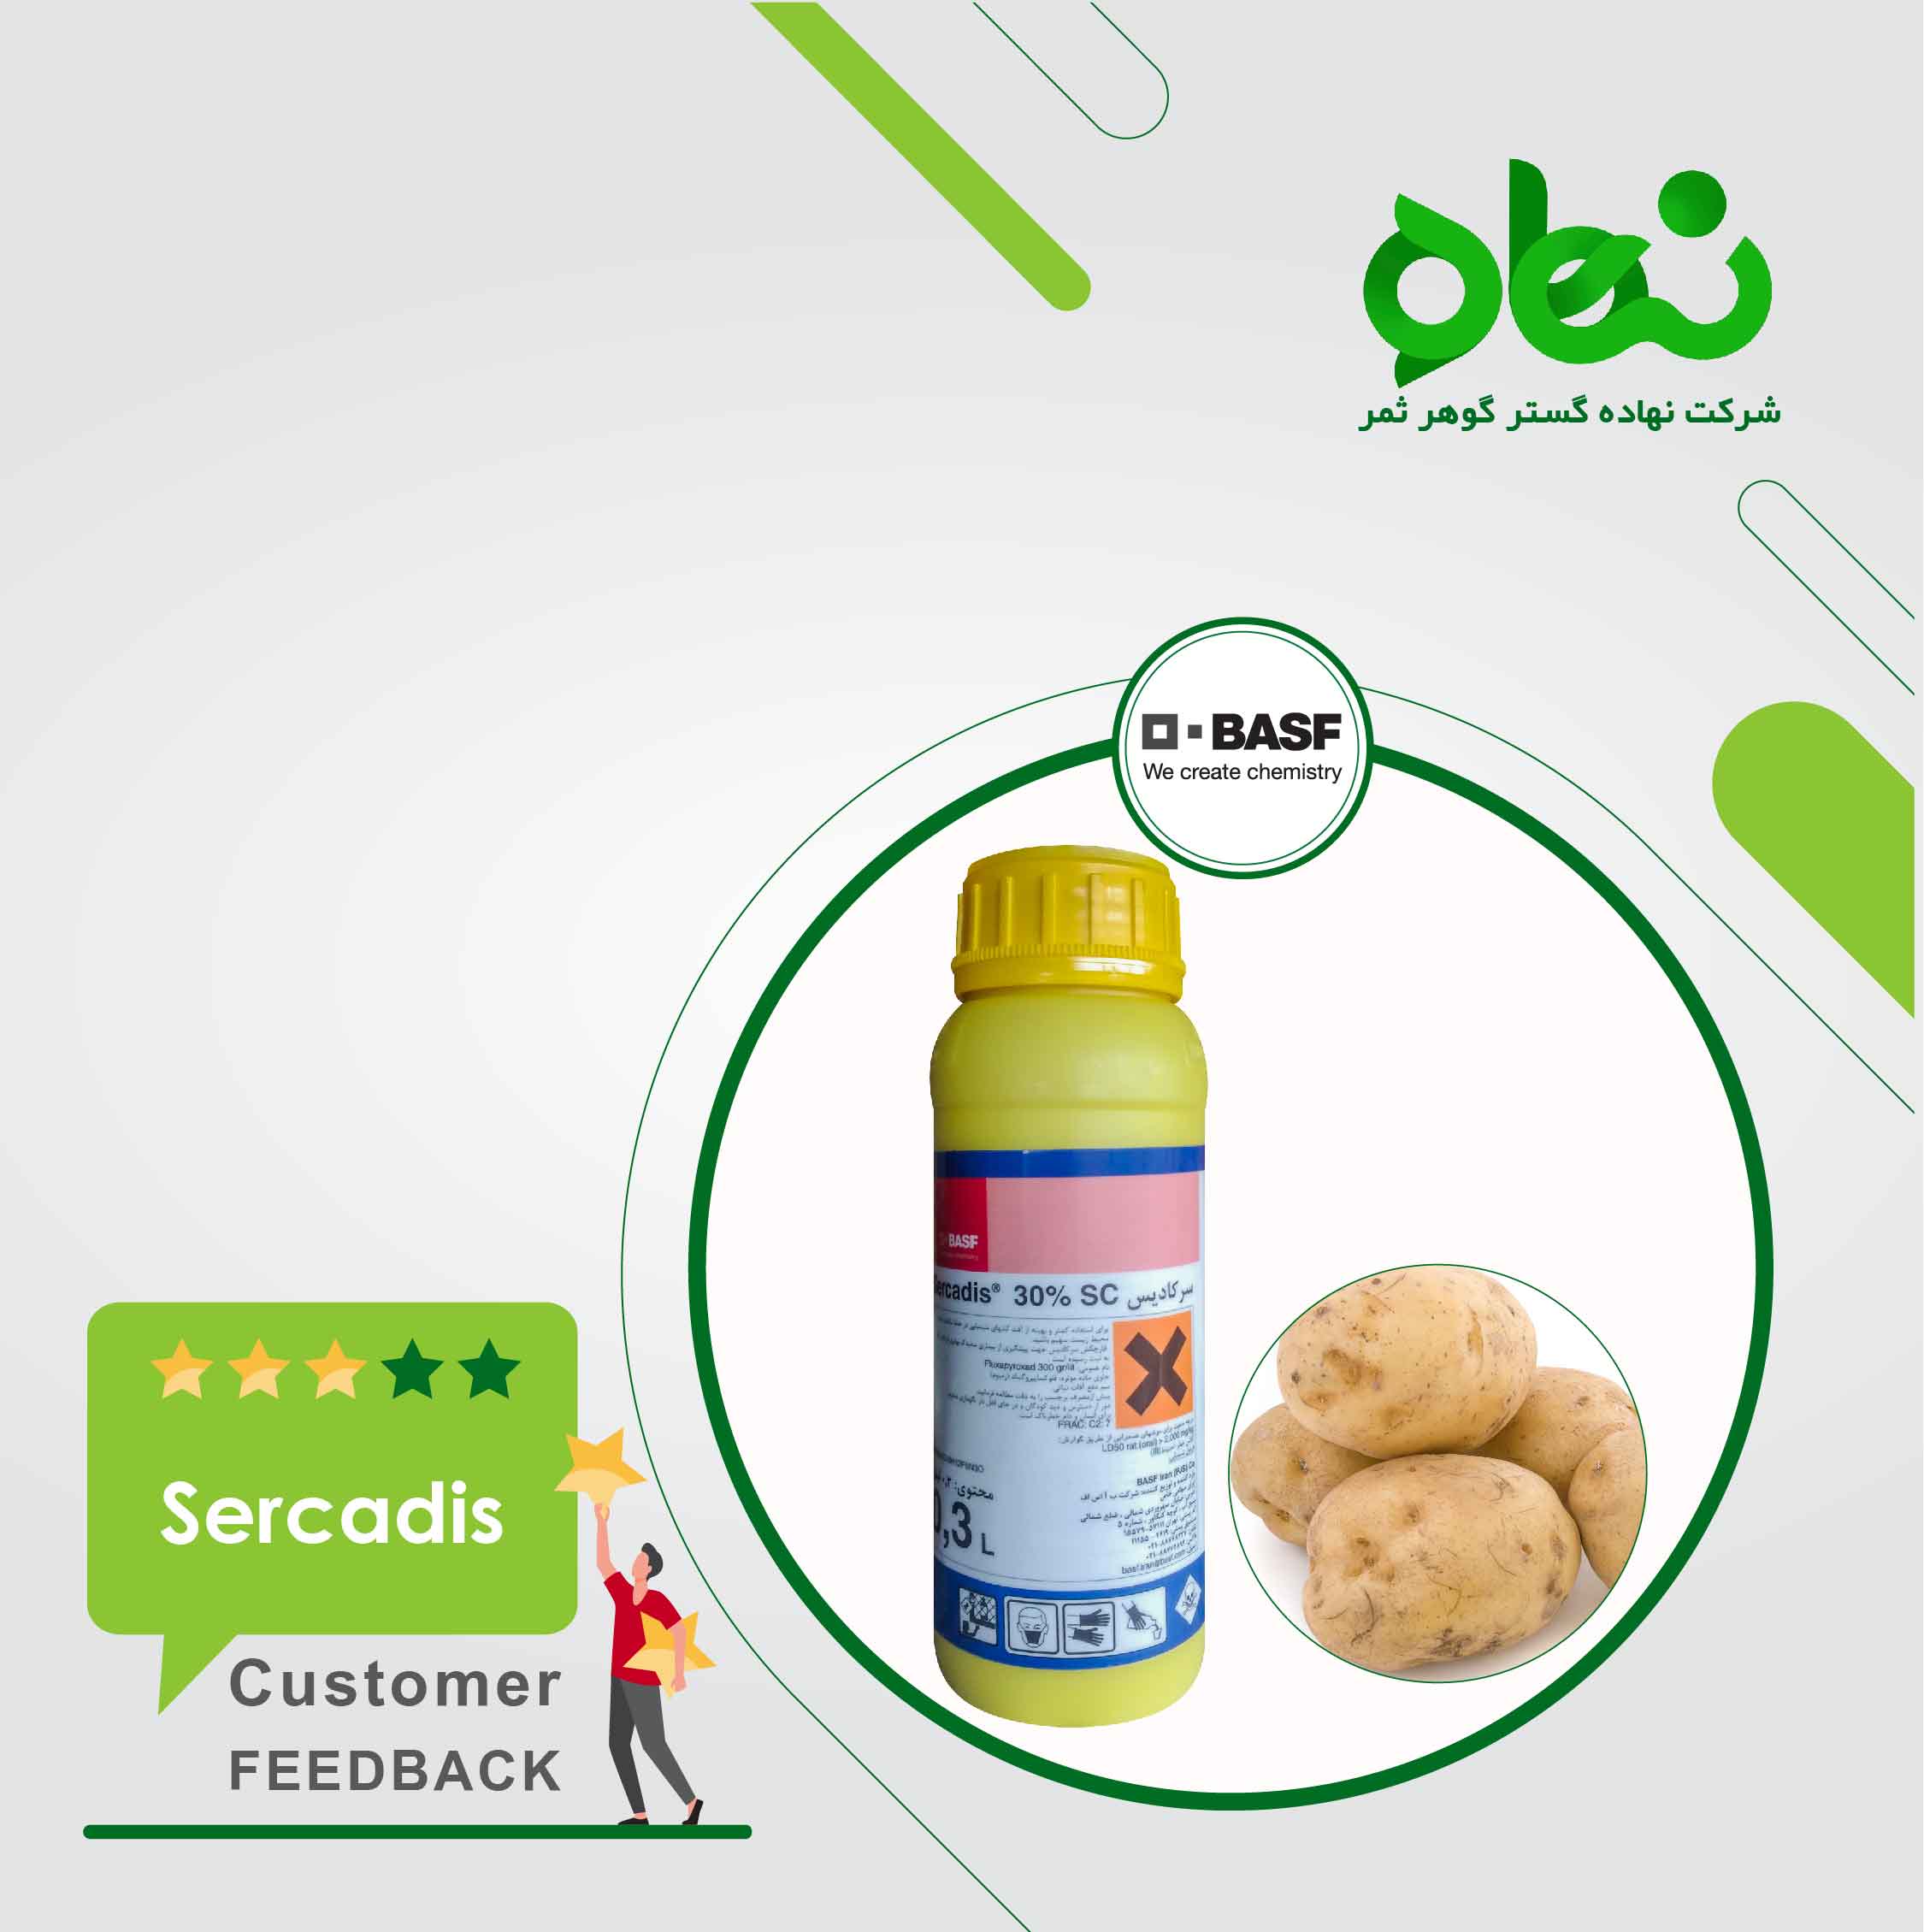 customer satisfaction with the use of sercadis as a seed treatment in potato tuber